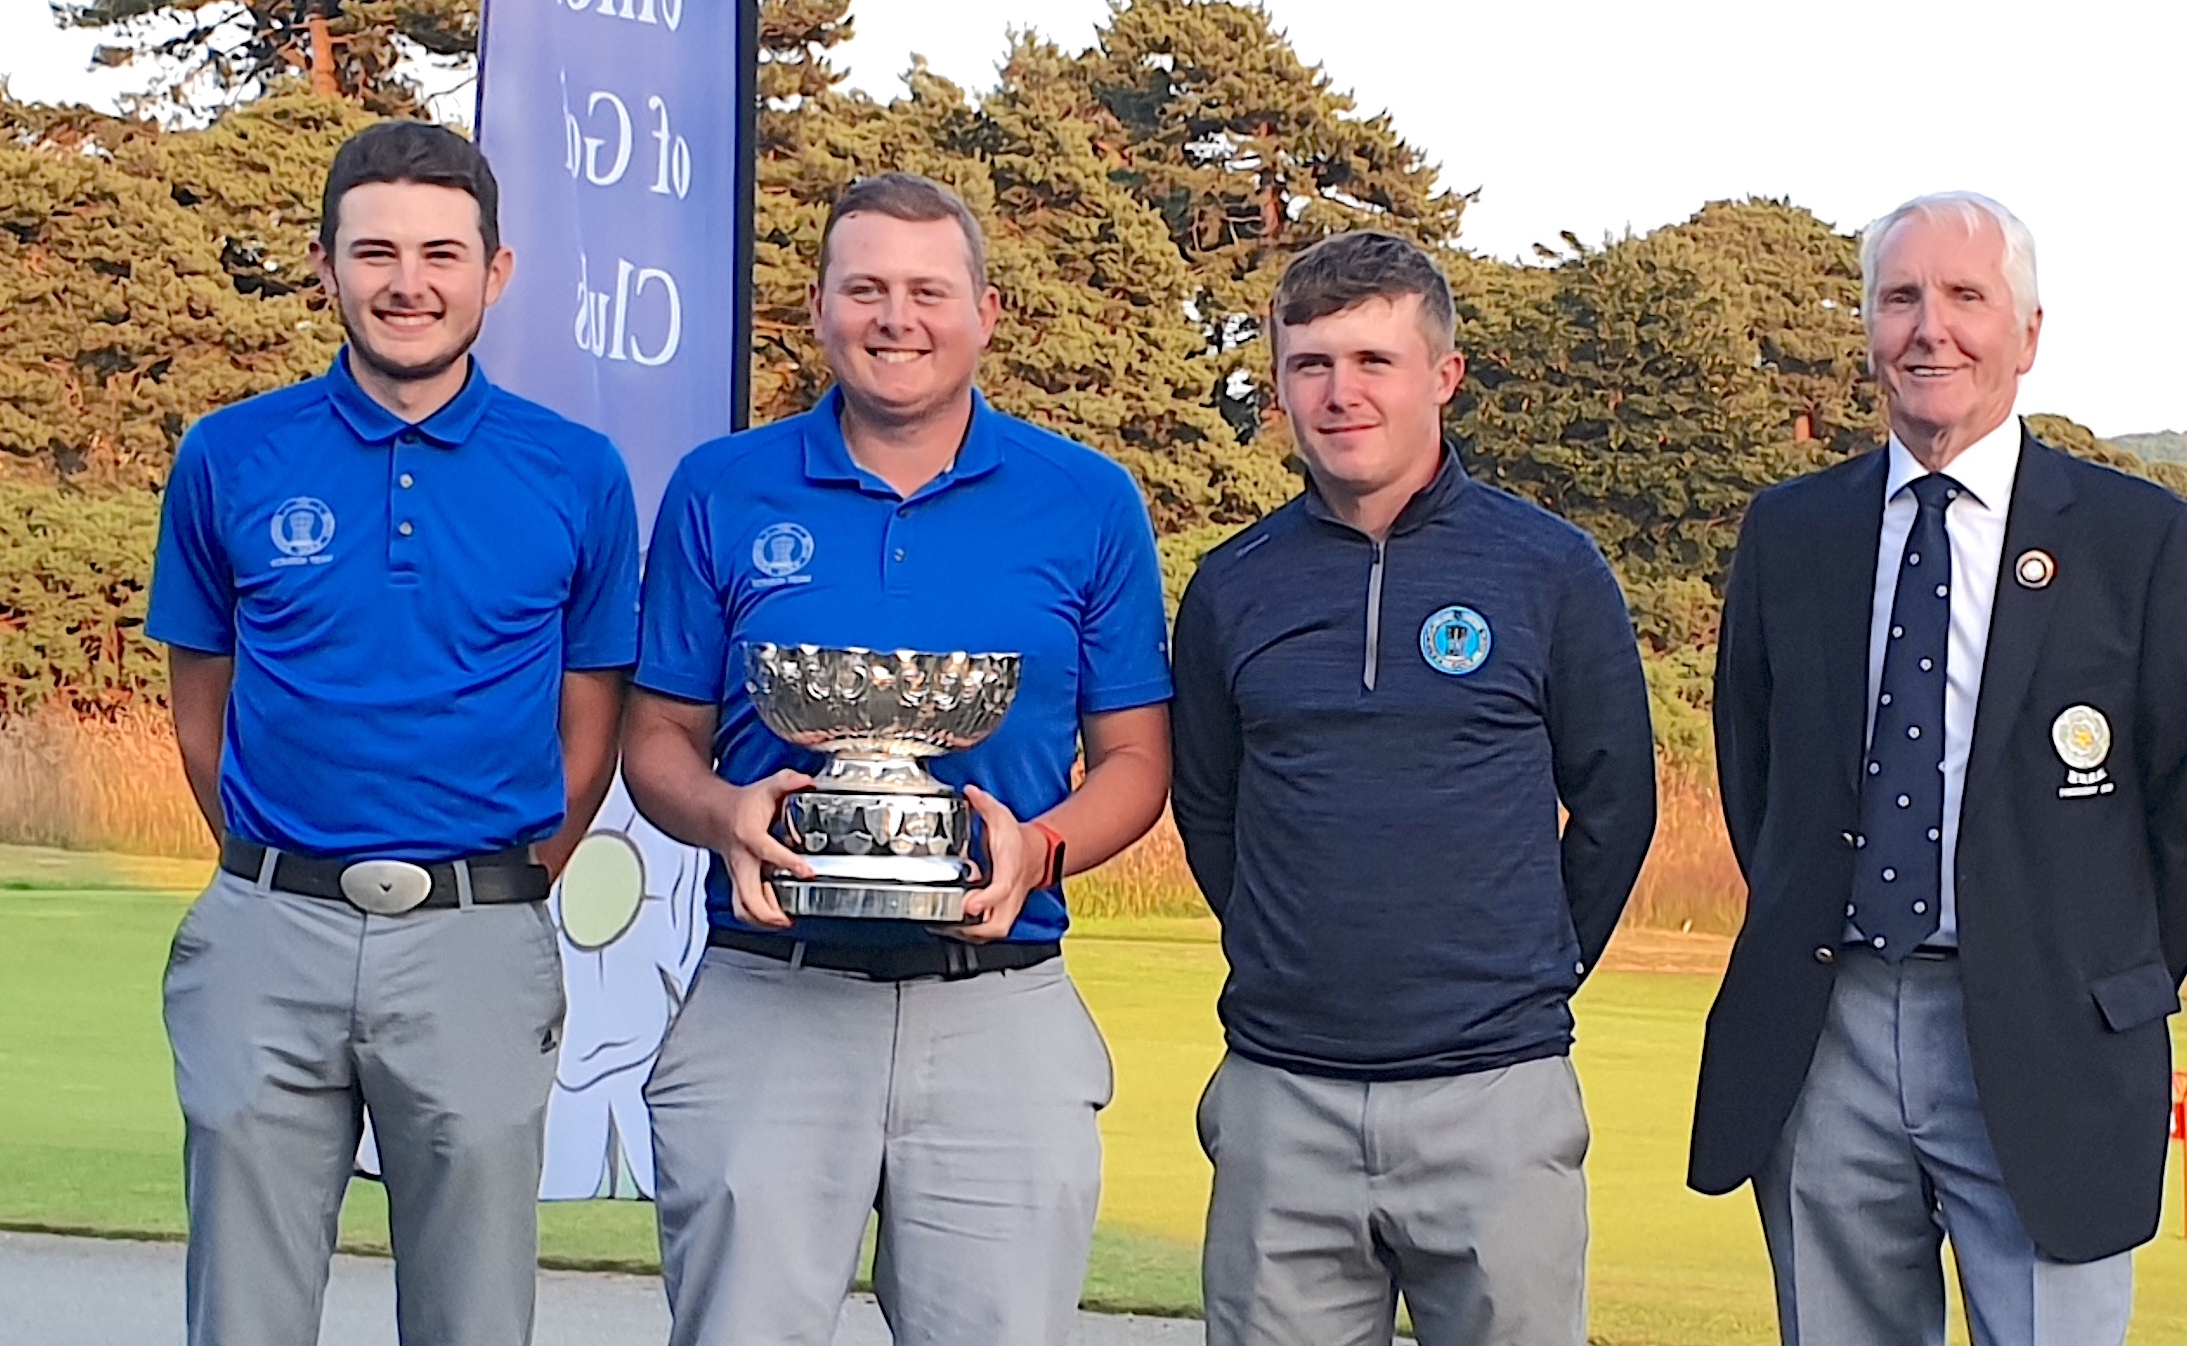 CHAMPIONS AGAIN: Nick Raybould holds the trophy, presented by Yorkshire president Cameron Thomson. Far left is Matt Raybould and also pictured is Jack Maxey